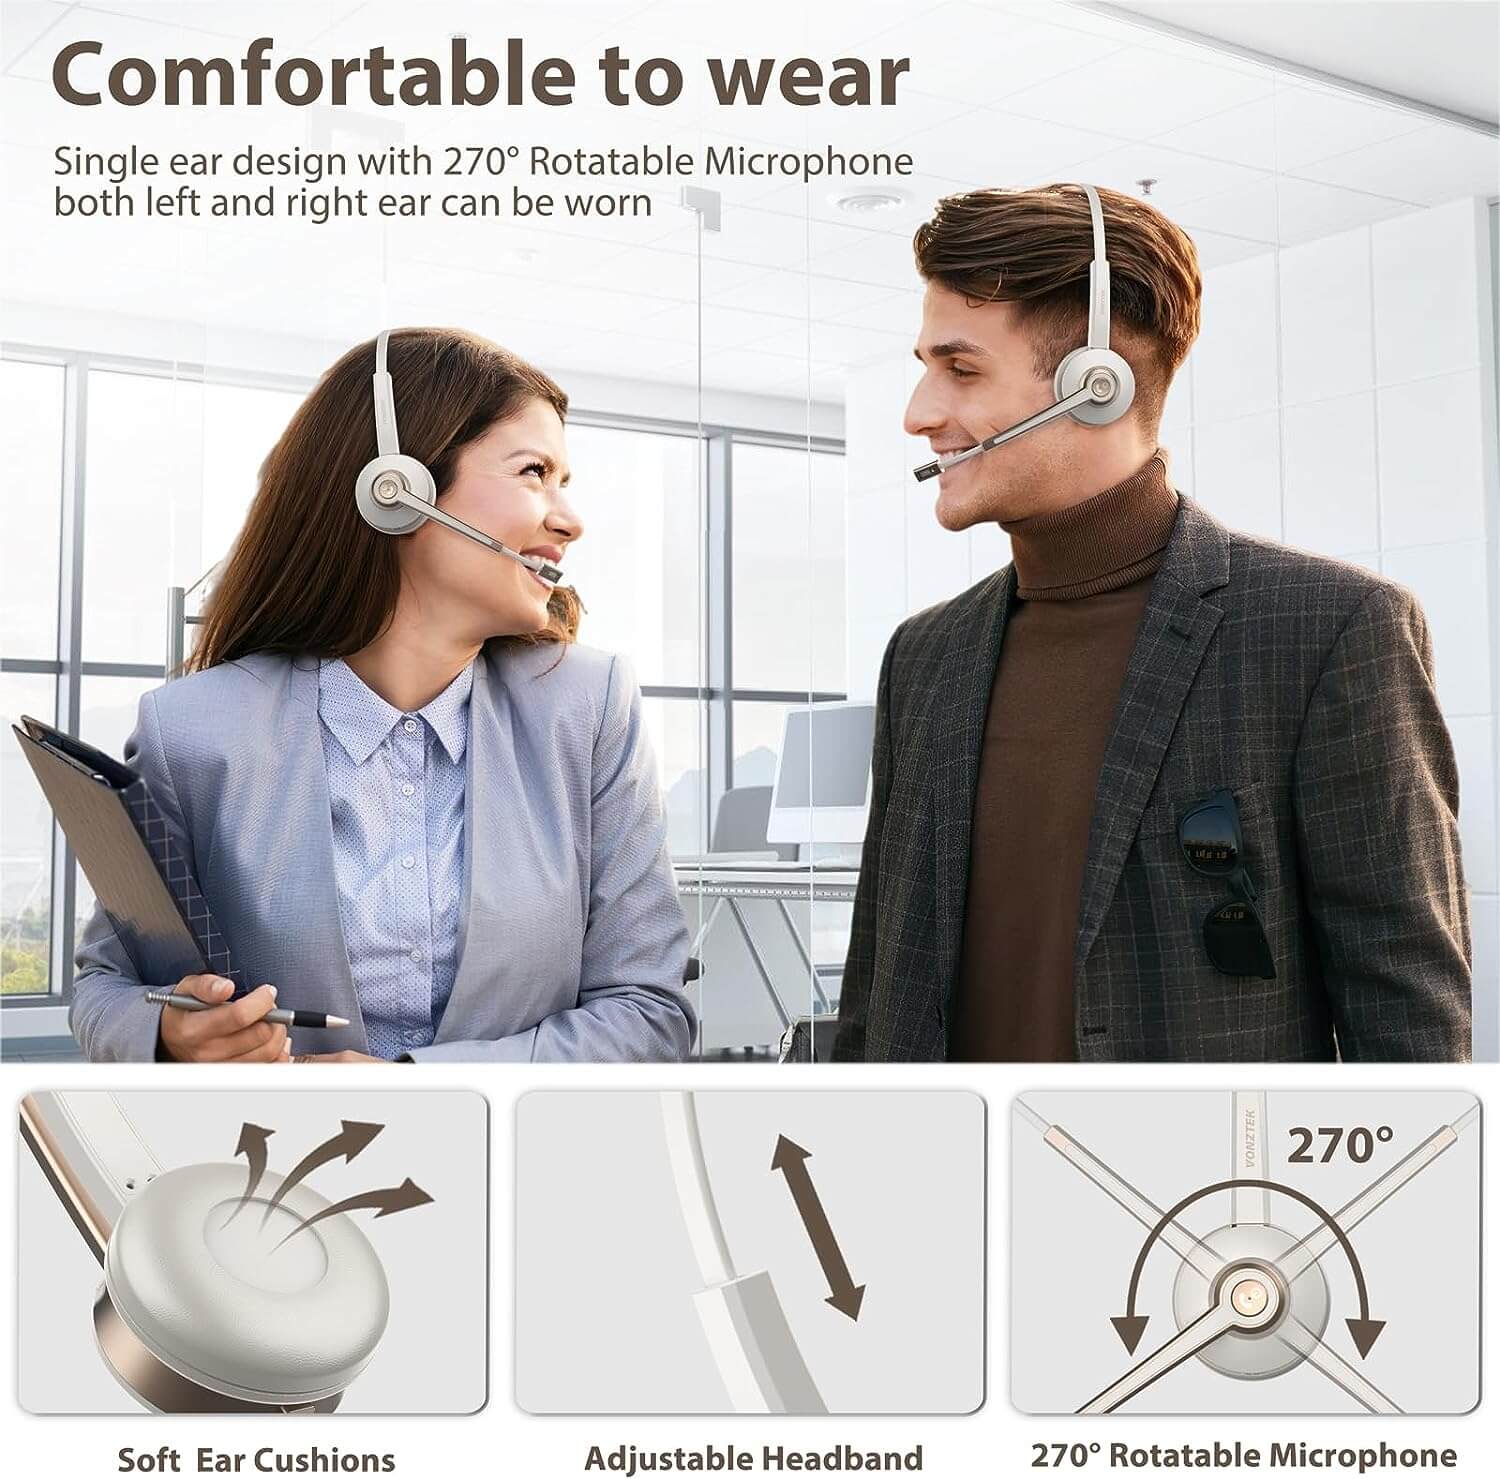 Comfortable to wear,Single ear design with 270° rotatable microphone both left and right ear can be worn,Soft ear cushions,Adjustable headband,270° rotatable microphone.